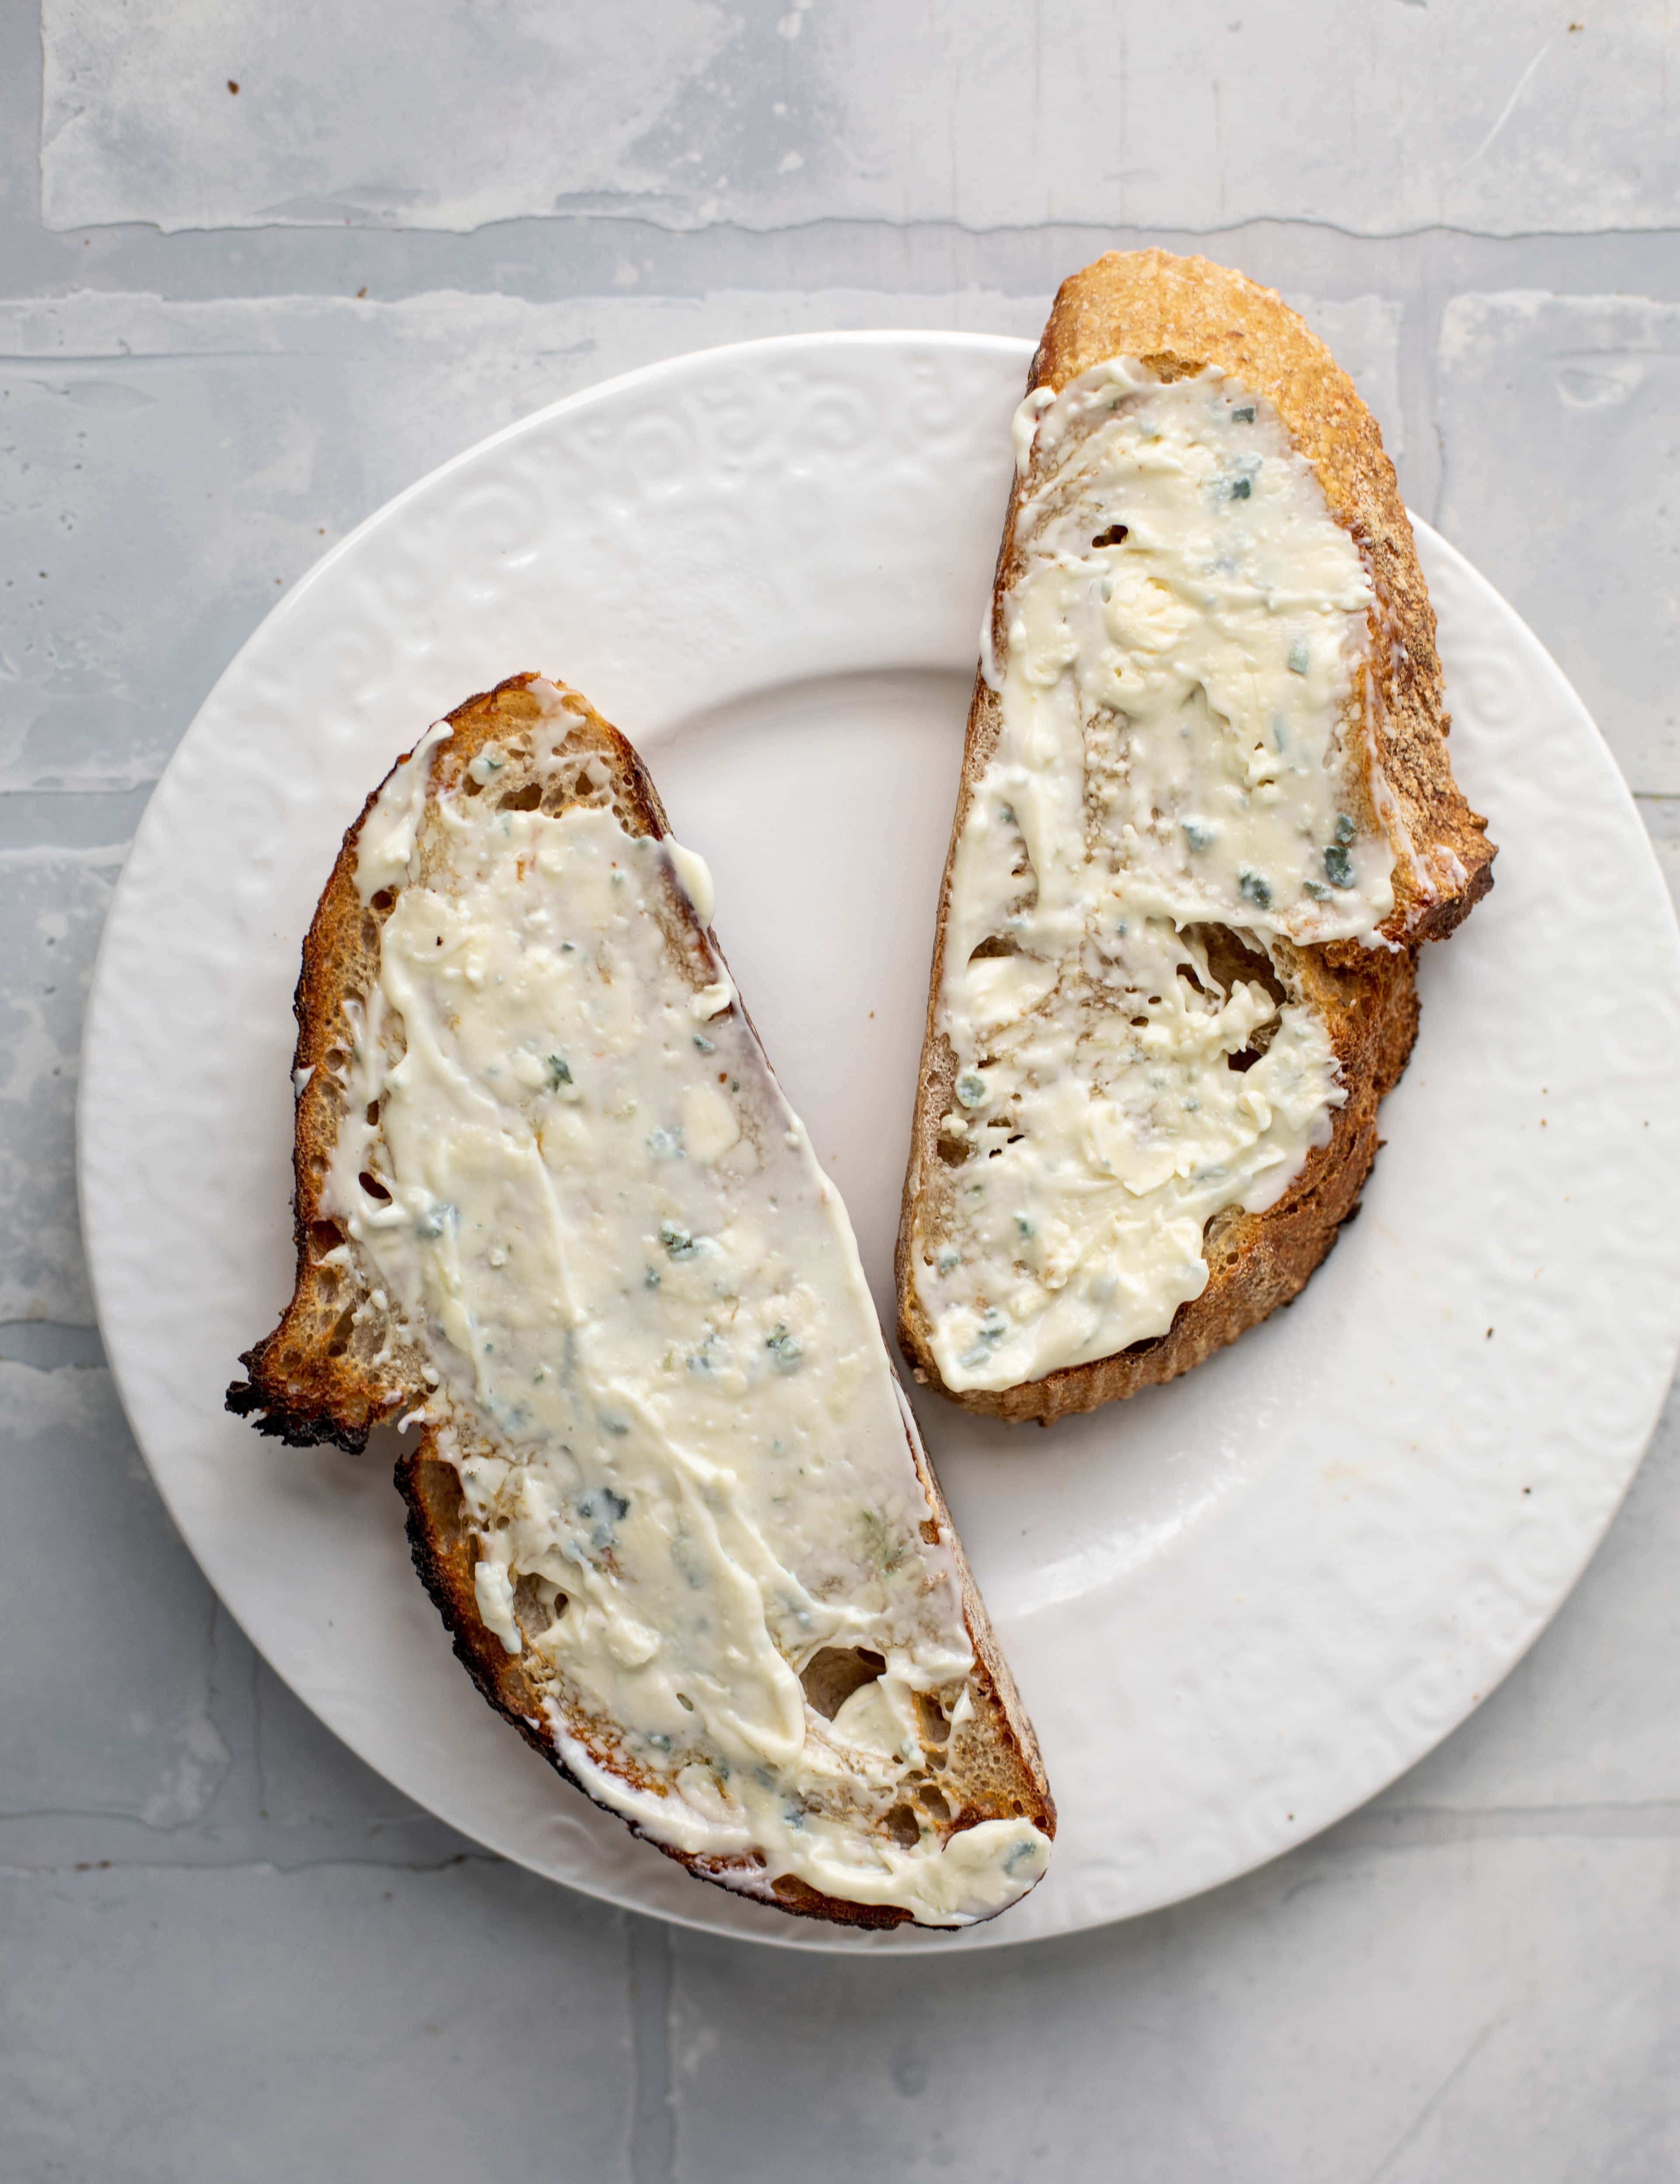 blue cheese mayo on sourdough toast